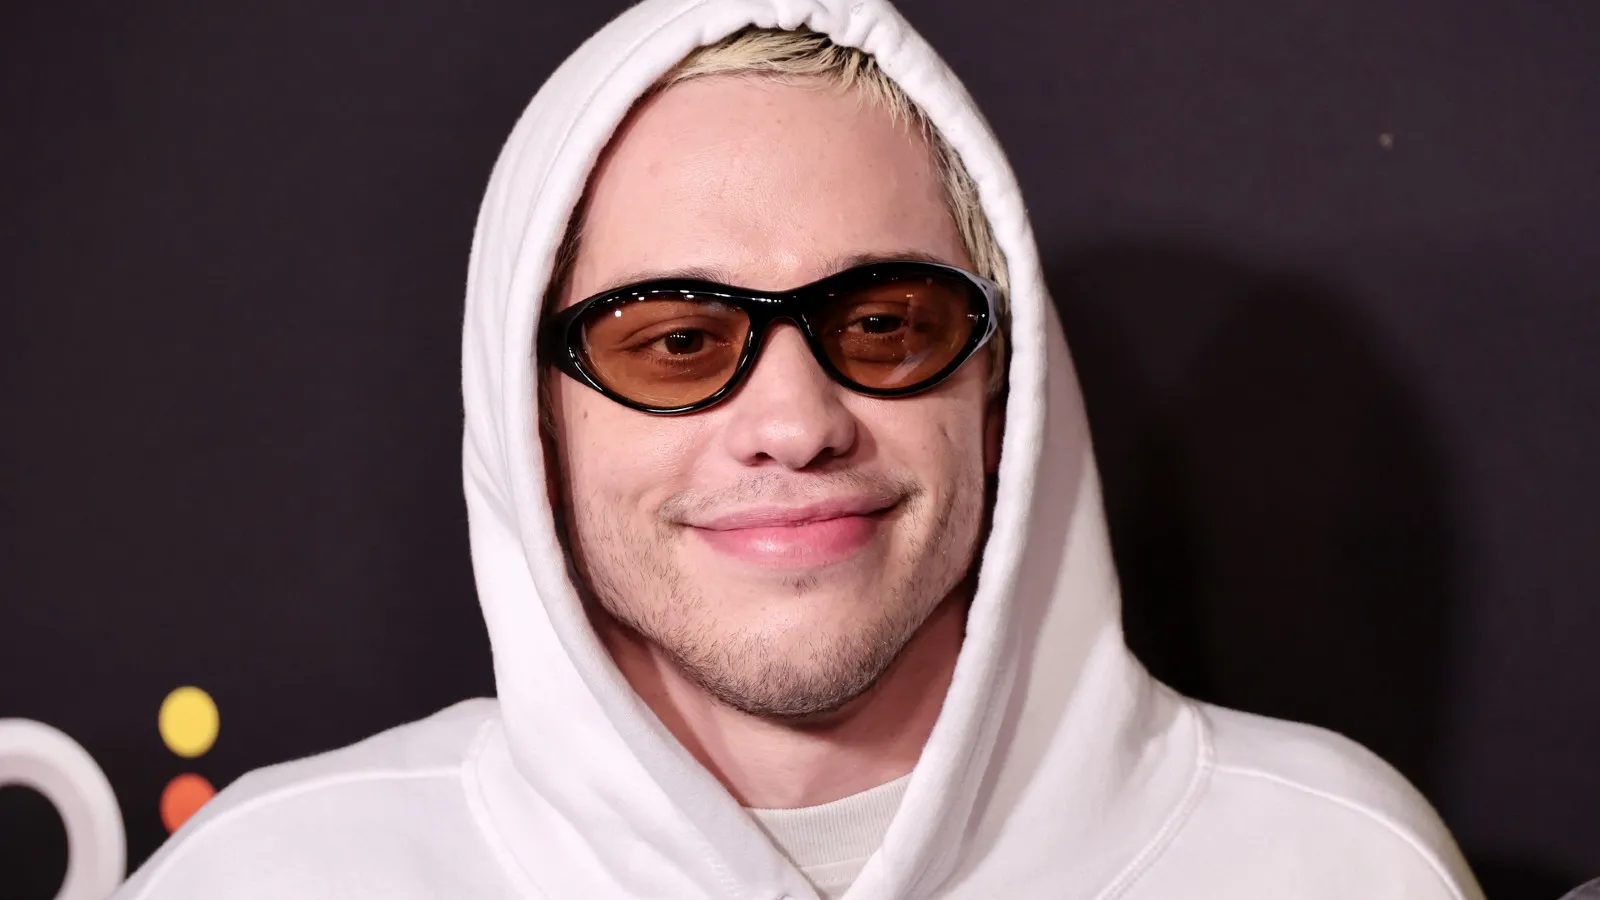 Pete Davidson visits Peacock's "Get to know Sweet" New York premiere on September 20, 2022 in New York City.